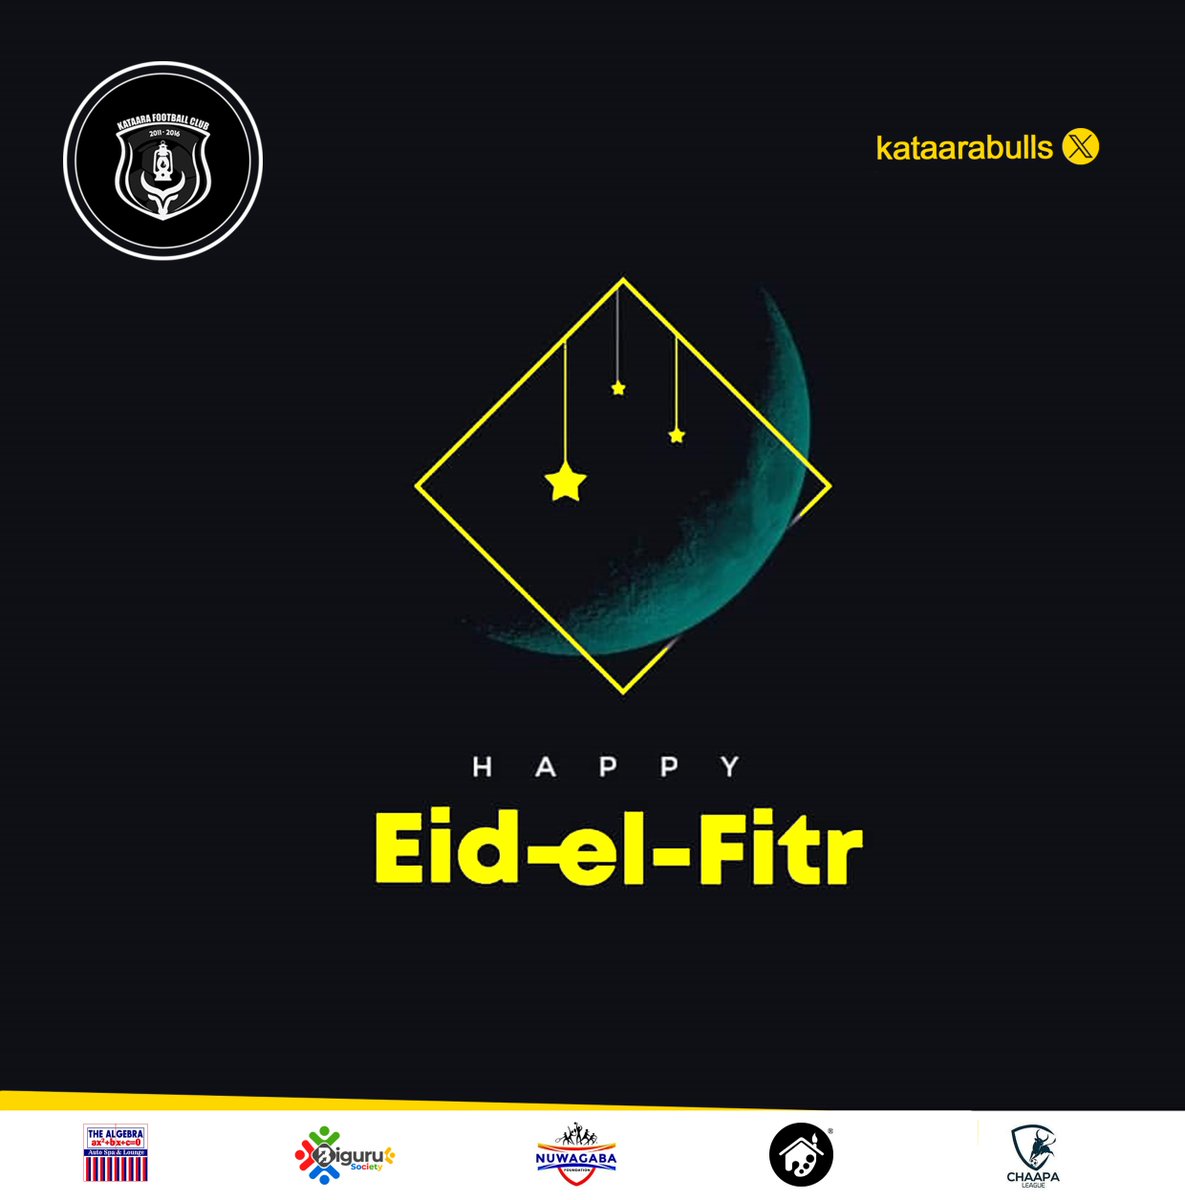 🌺 On this blessed day of Eid-el-Fitr, may Allah bless everyone who's part of the Violets family and freinds with health, happiness, and success. Eid Mubarak fromall of us @Kataarabulls with our very own @The_Algebra256 ! 🌺